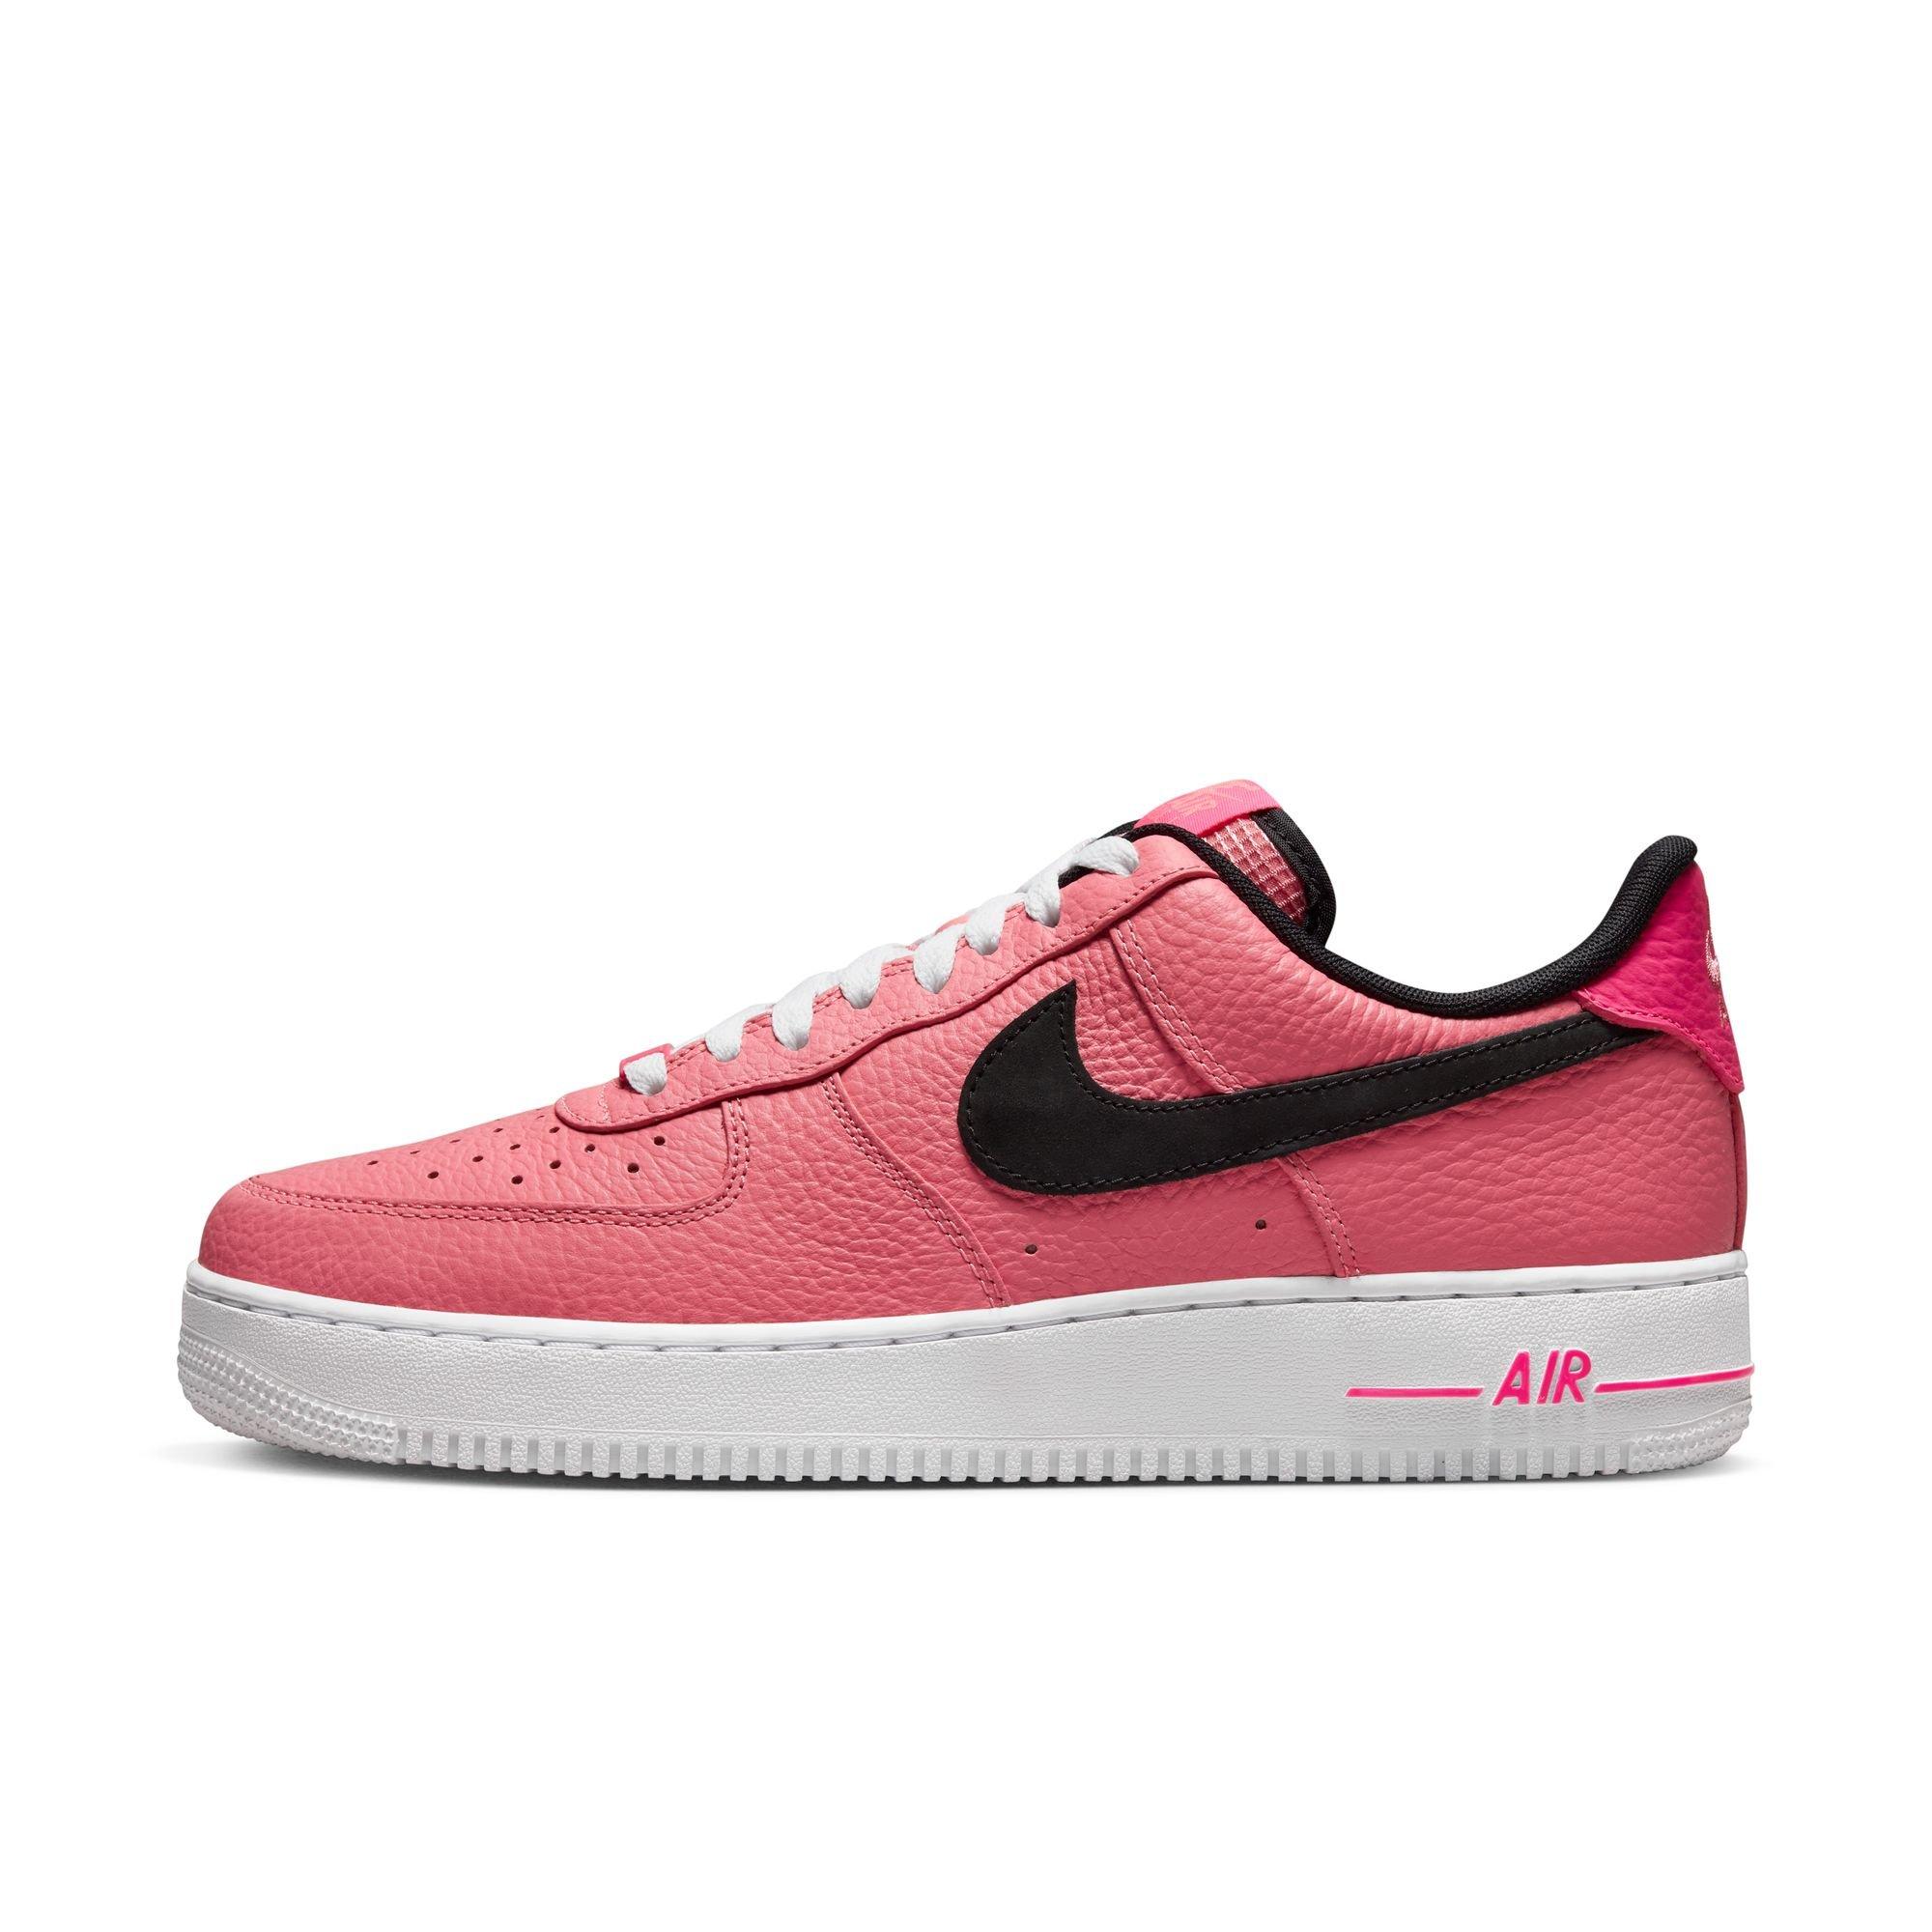 Nike Womens Air Force 1 valentine's Day limited edition size women's 7.5  pink